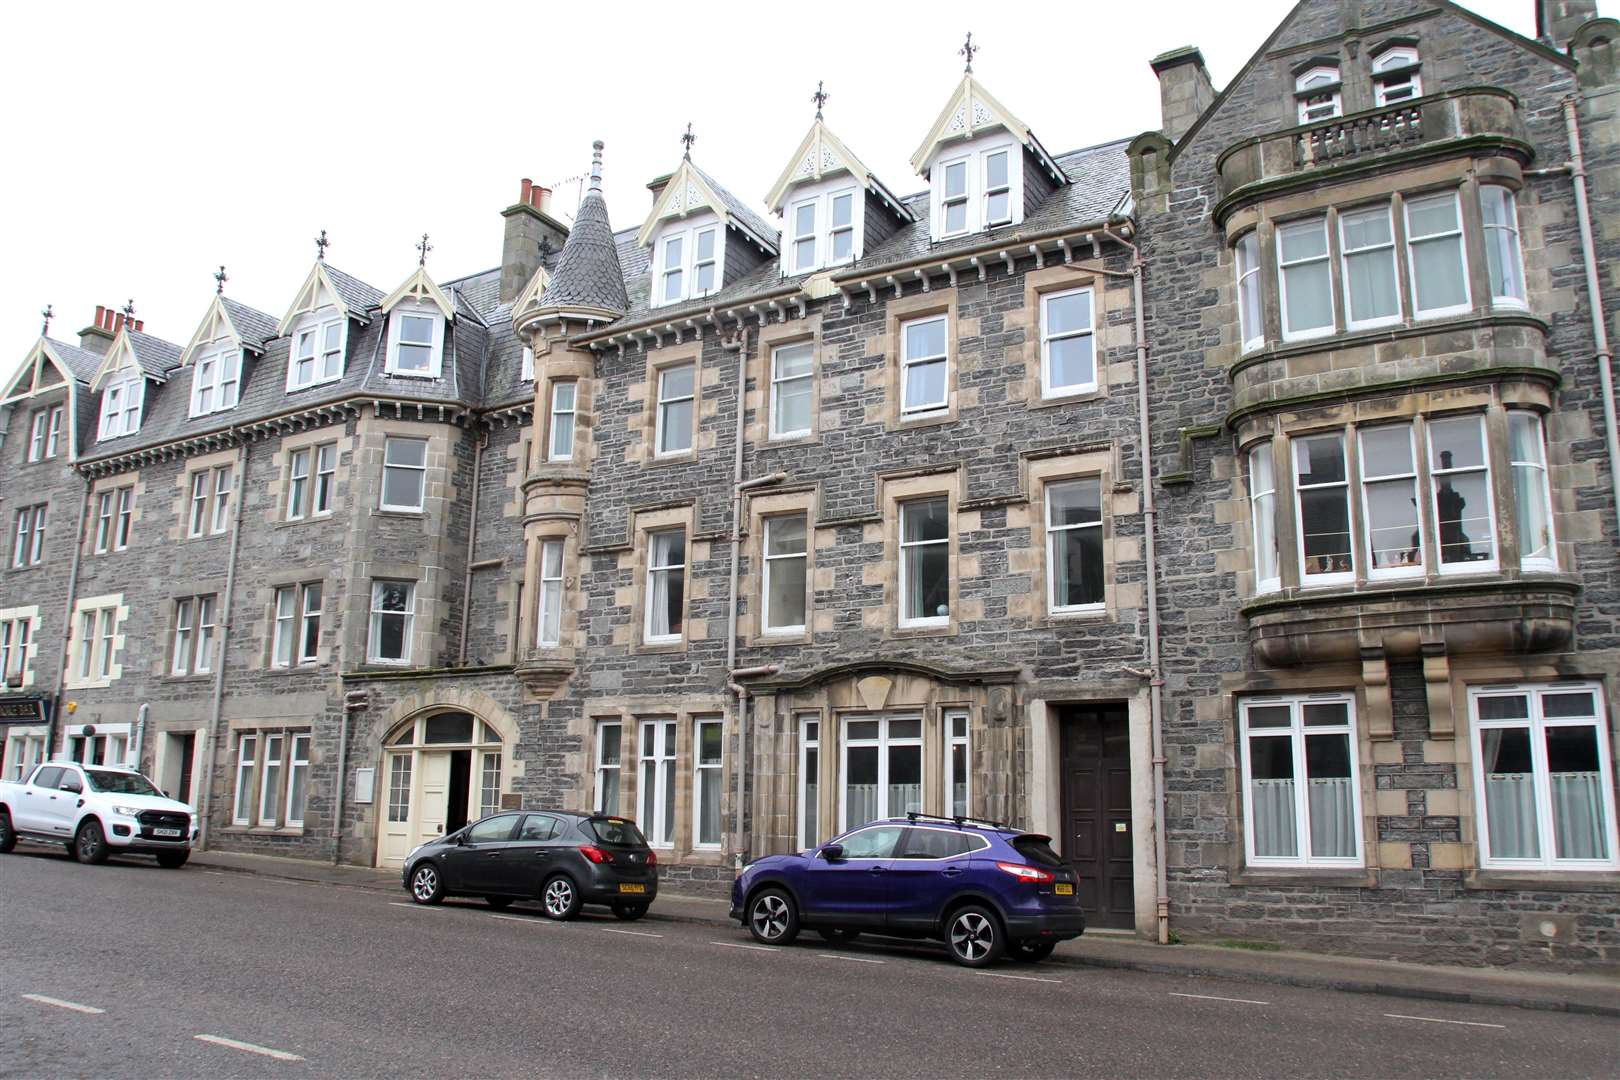 Grandview House Nursing Home, on Grantown's High Street, is due to close shortly.